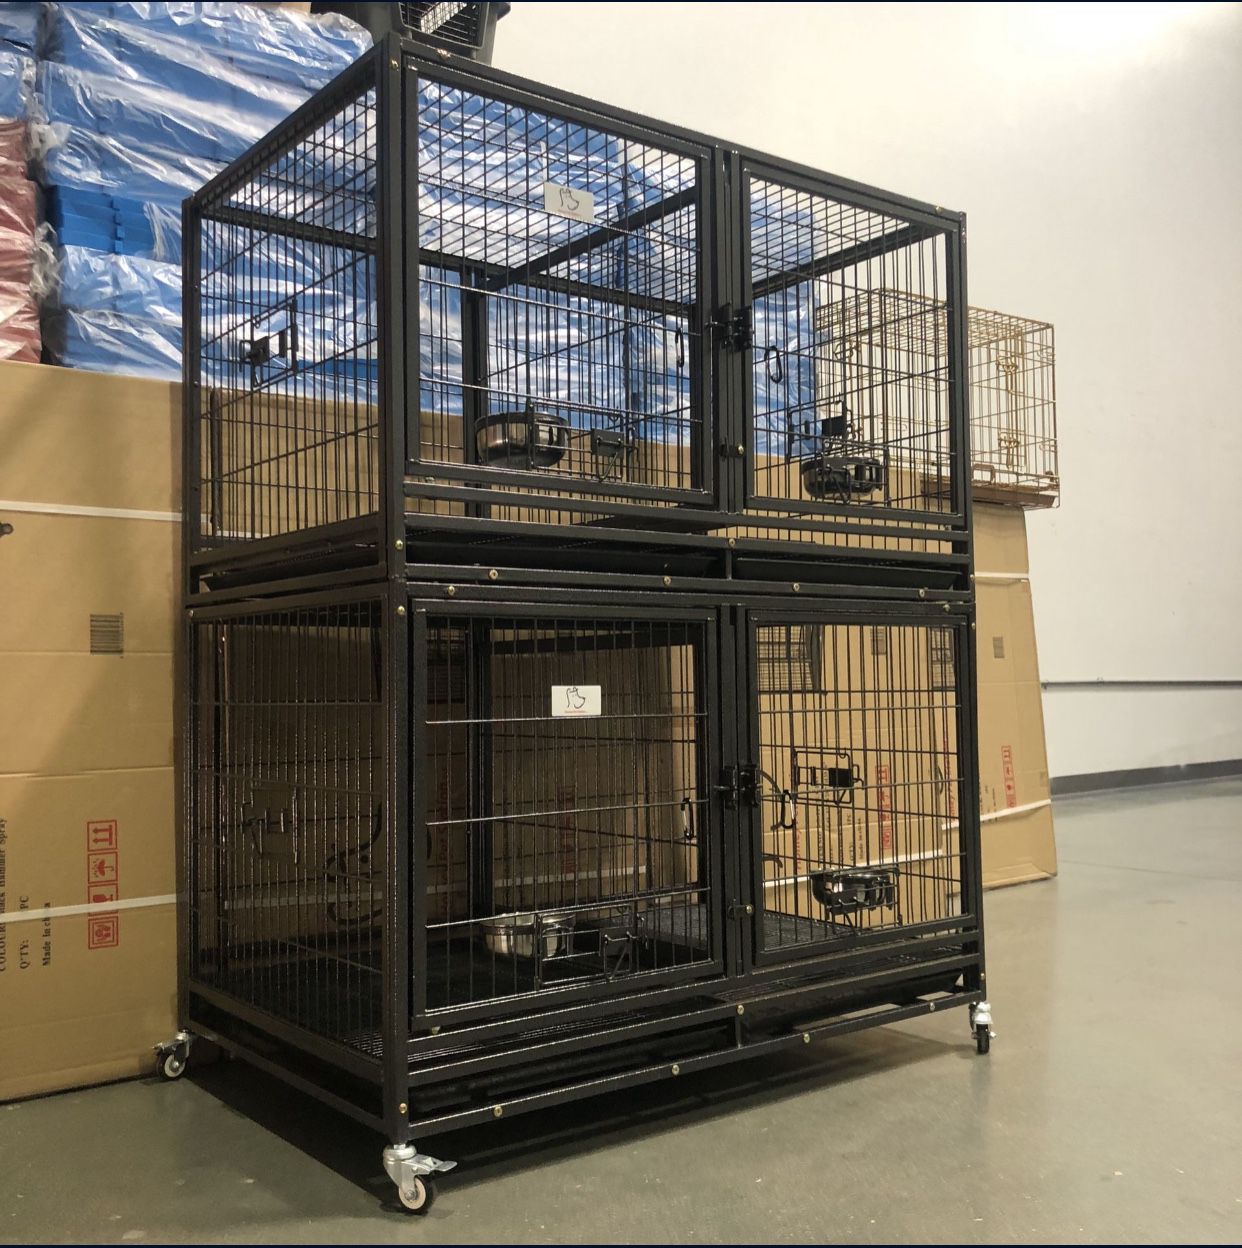  ✅ New Heavy duty Comfy Kennel Crate Cage W/ Trays & Casters 🐶Dimensions in pictures 🐶🐶